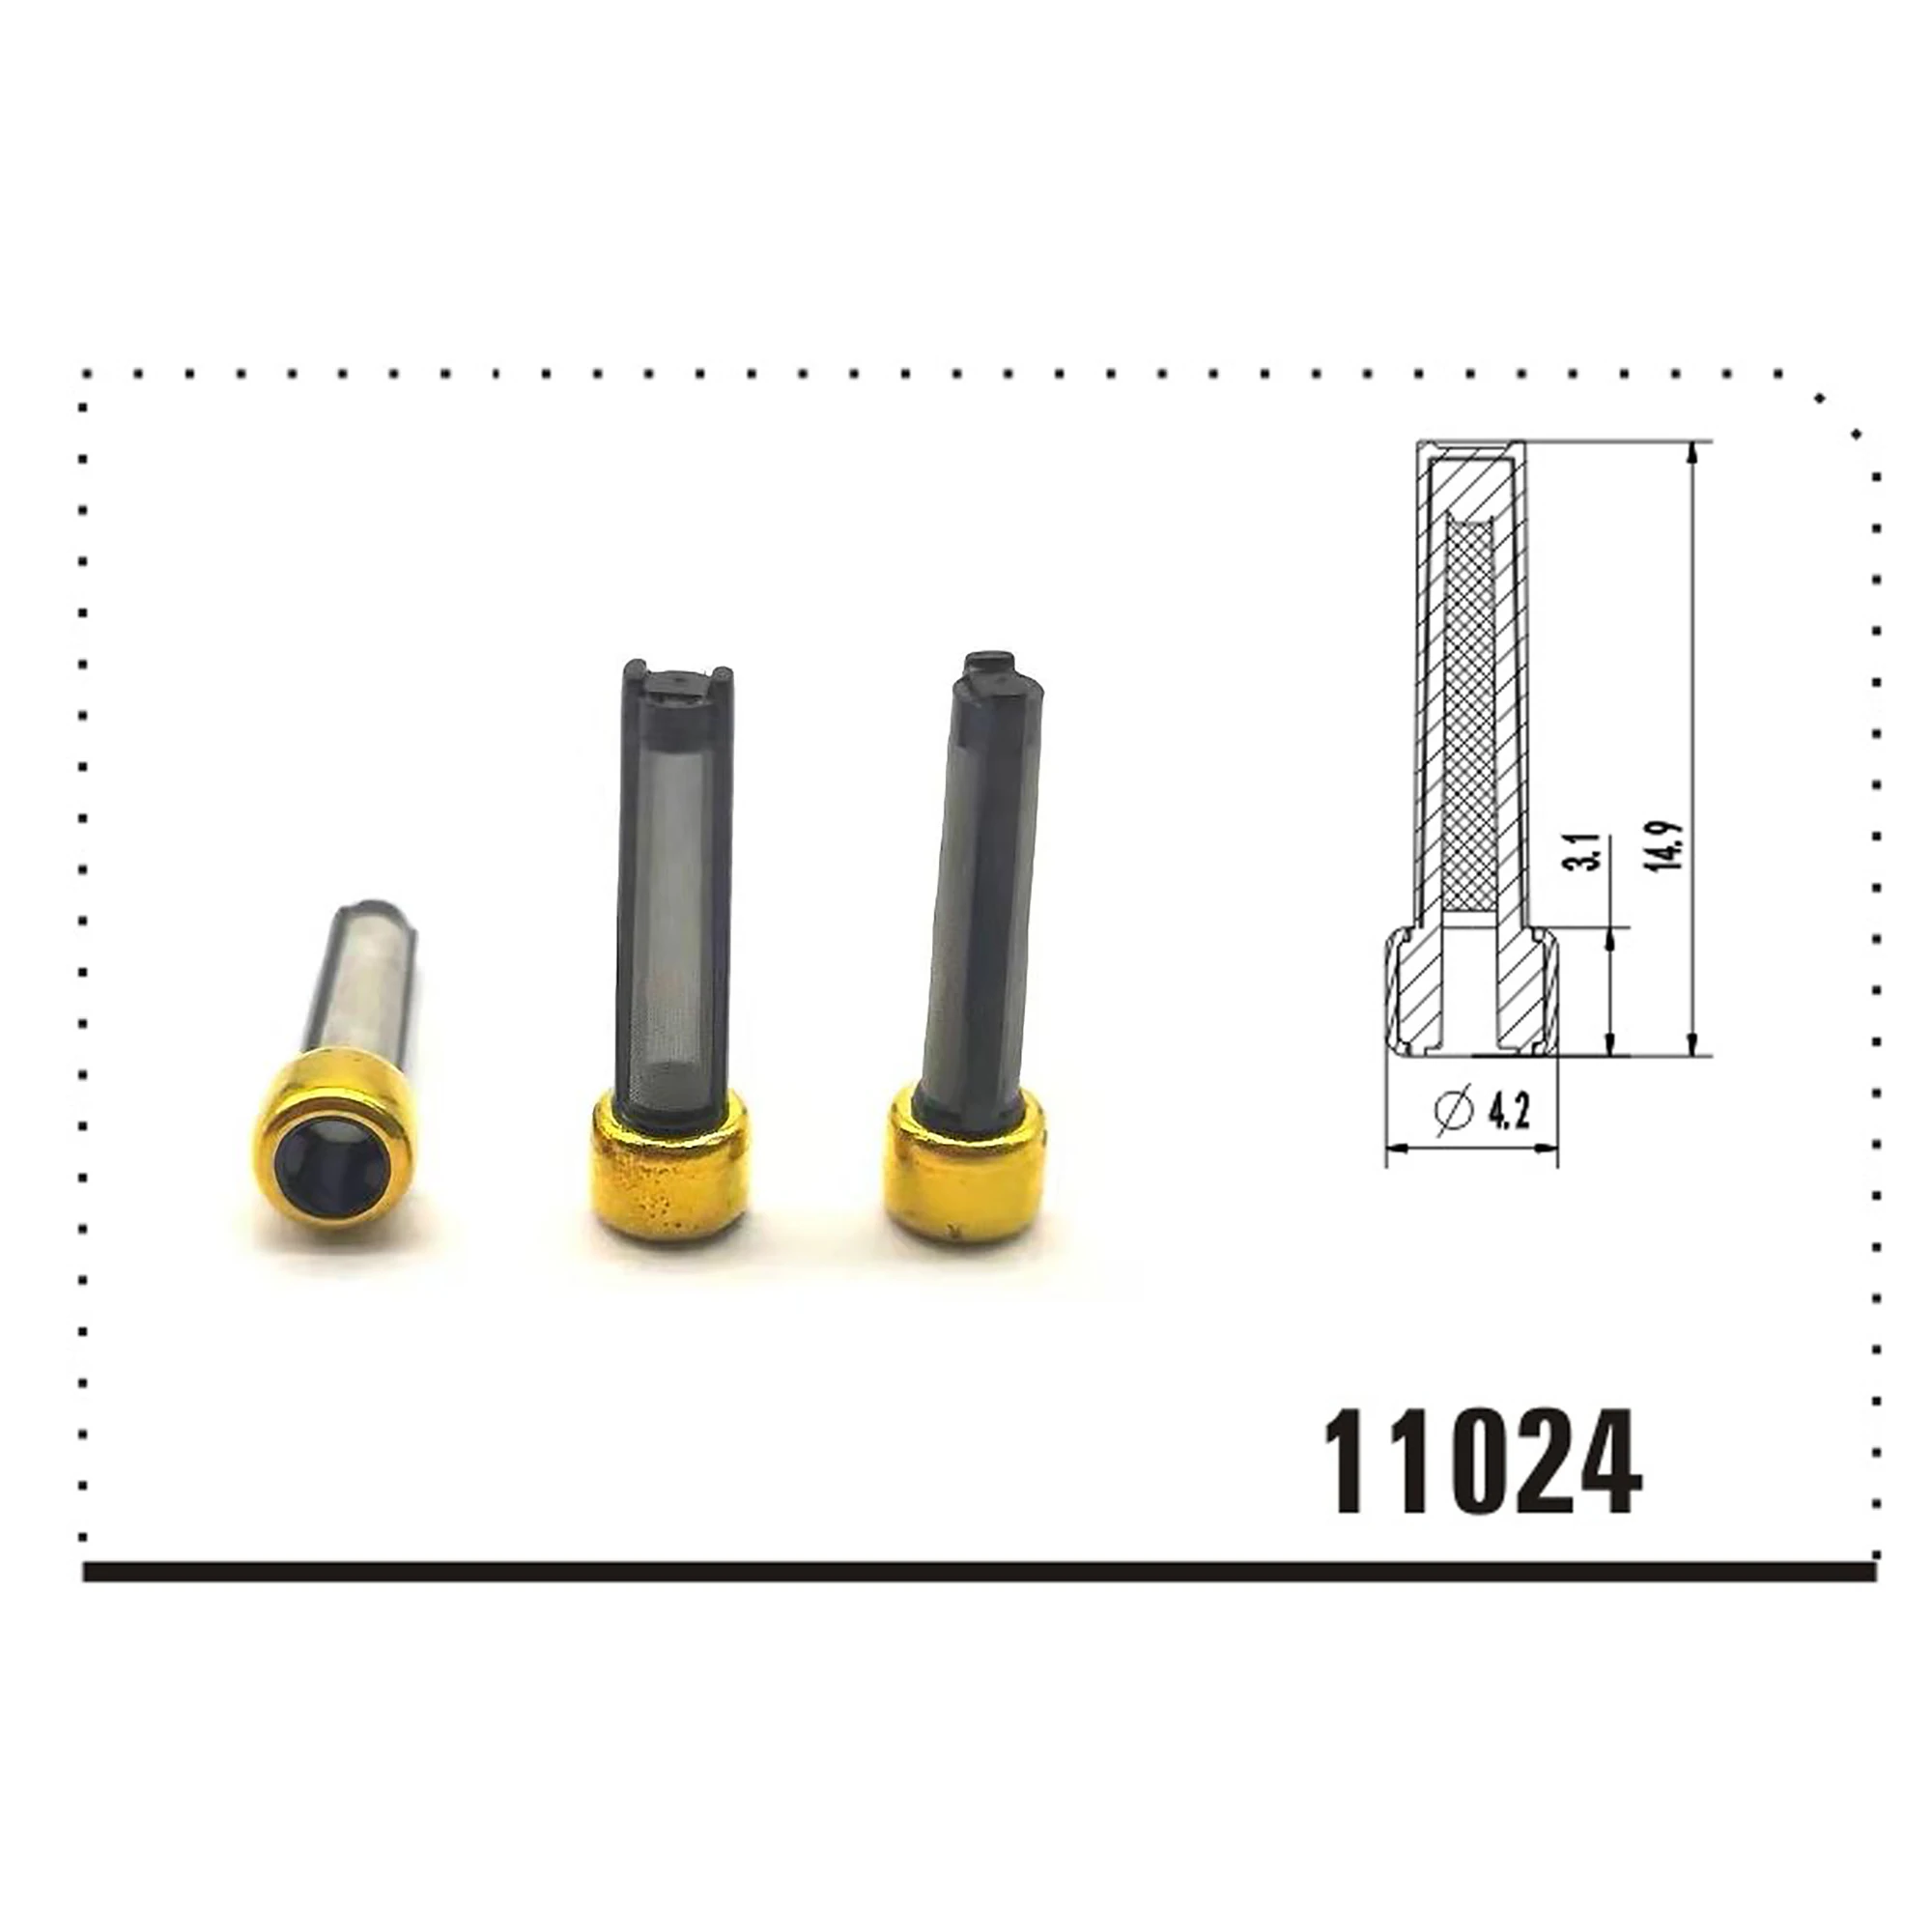 

200pcs Fuel Injector Micro Basket Filter Top Quality Injector Repair Service Kits Size: 4.2x3.1x14.9mm VD-FL-11024